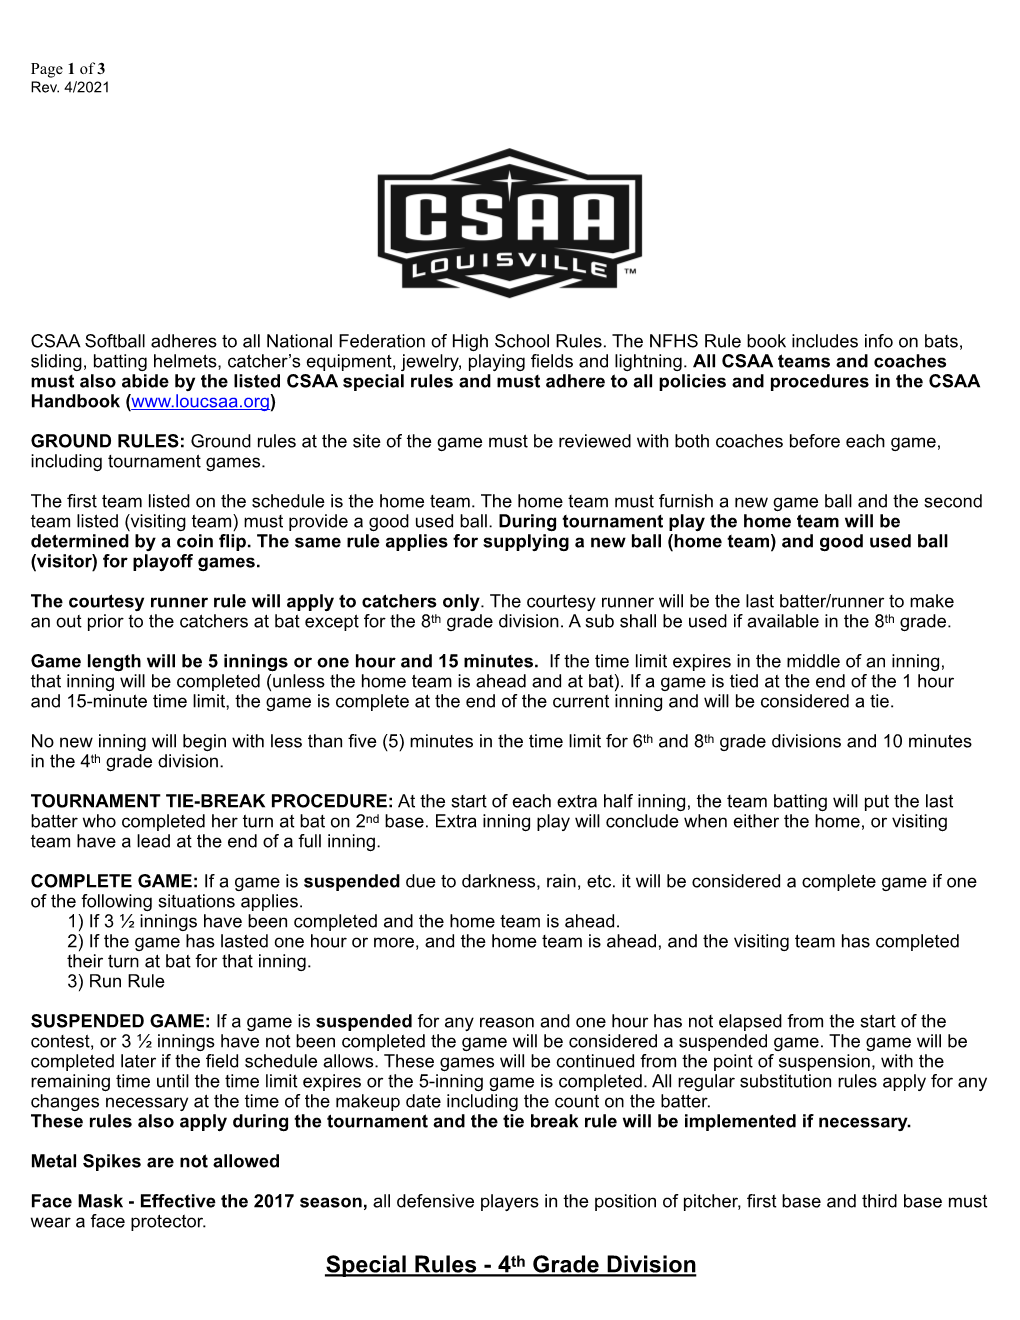 2021 Revised Special Rules-Fast Pitch Softball